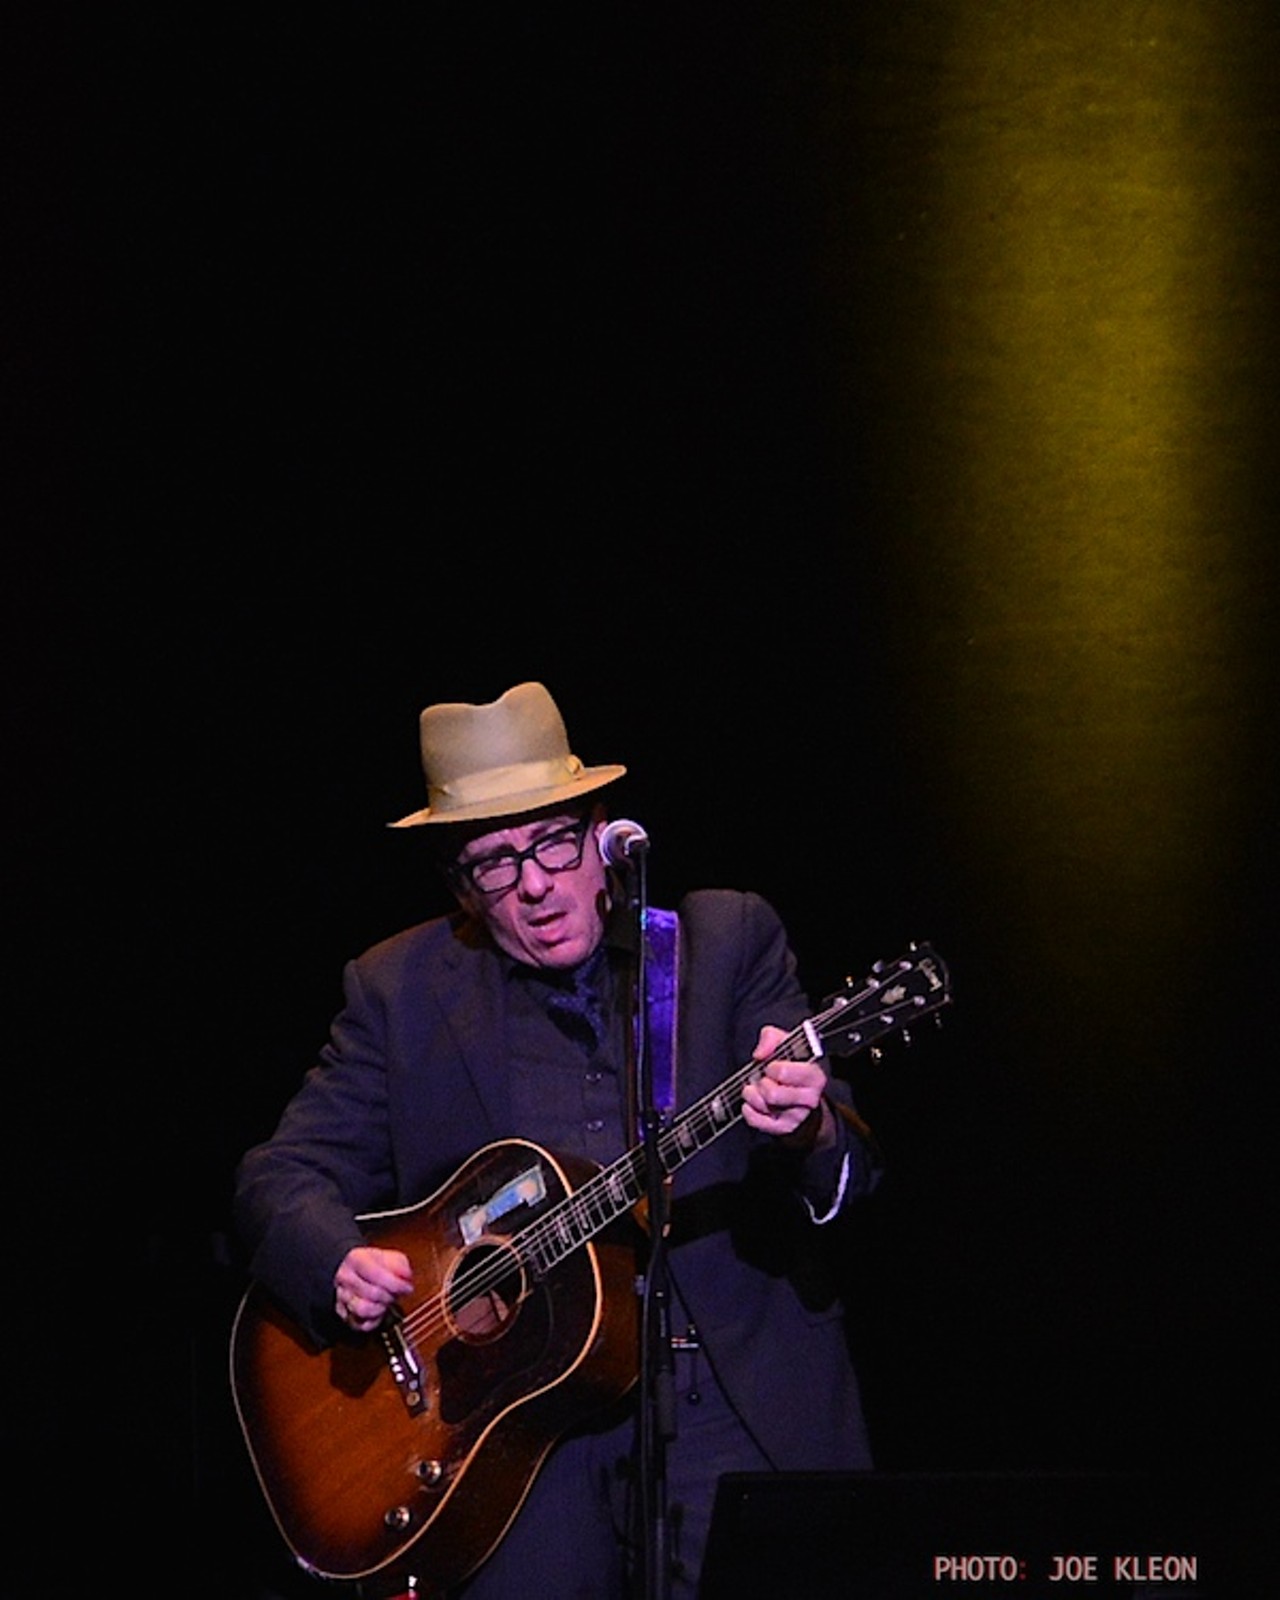 Elvis Costello Performing at the Palace Theatre